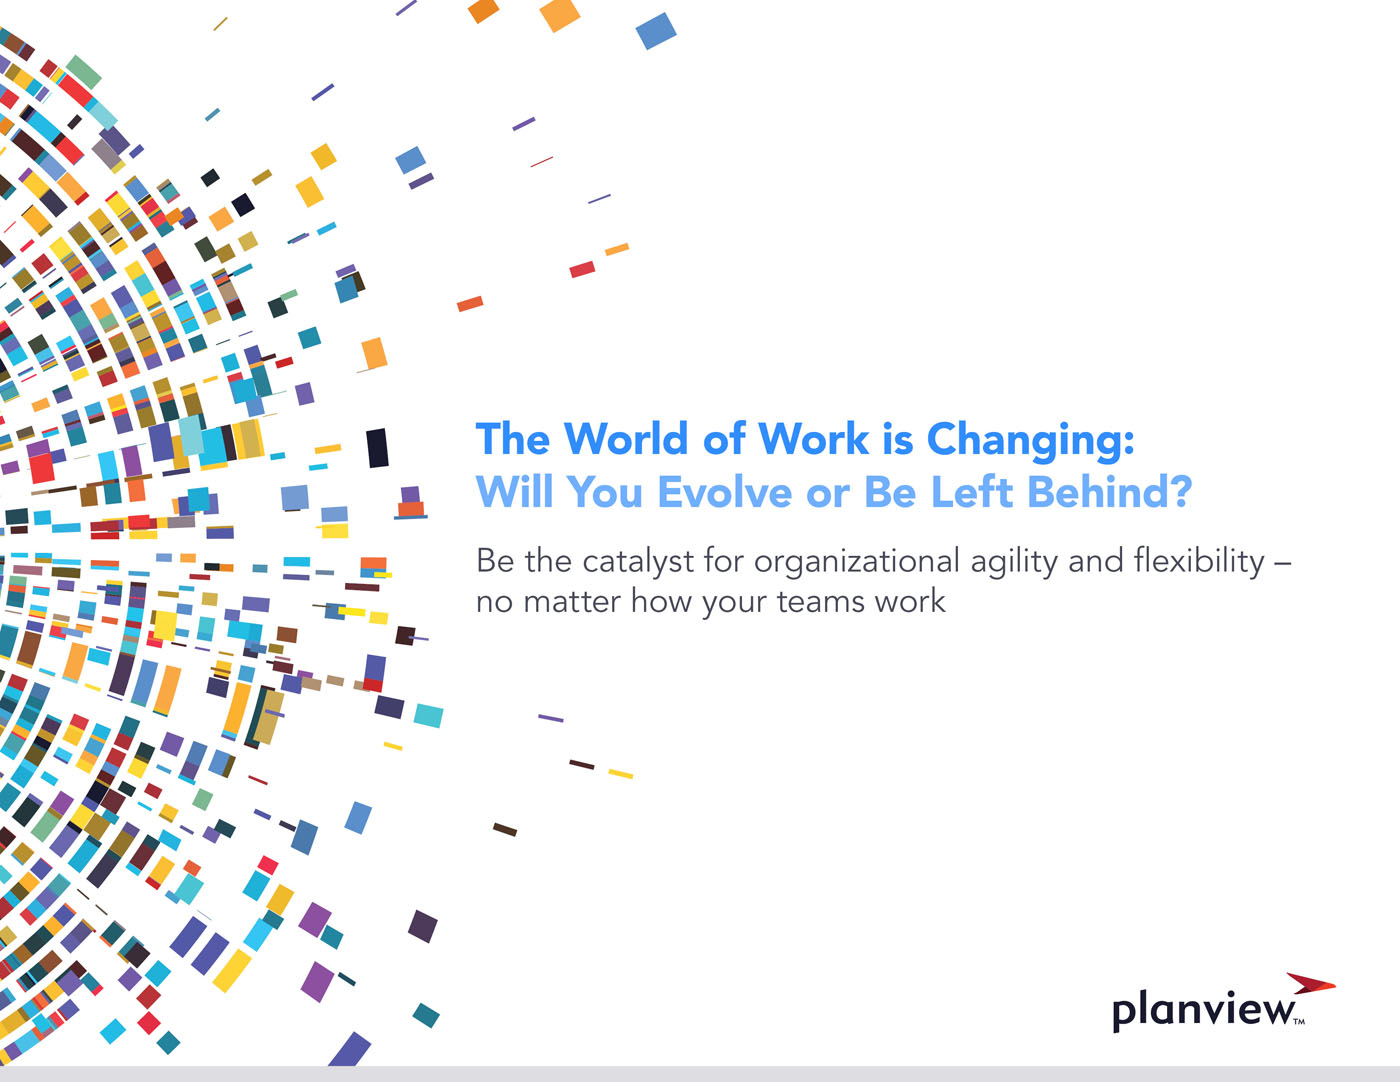 The World of Work is Changing: Will You Evolve or Be Left Behind?